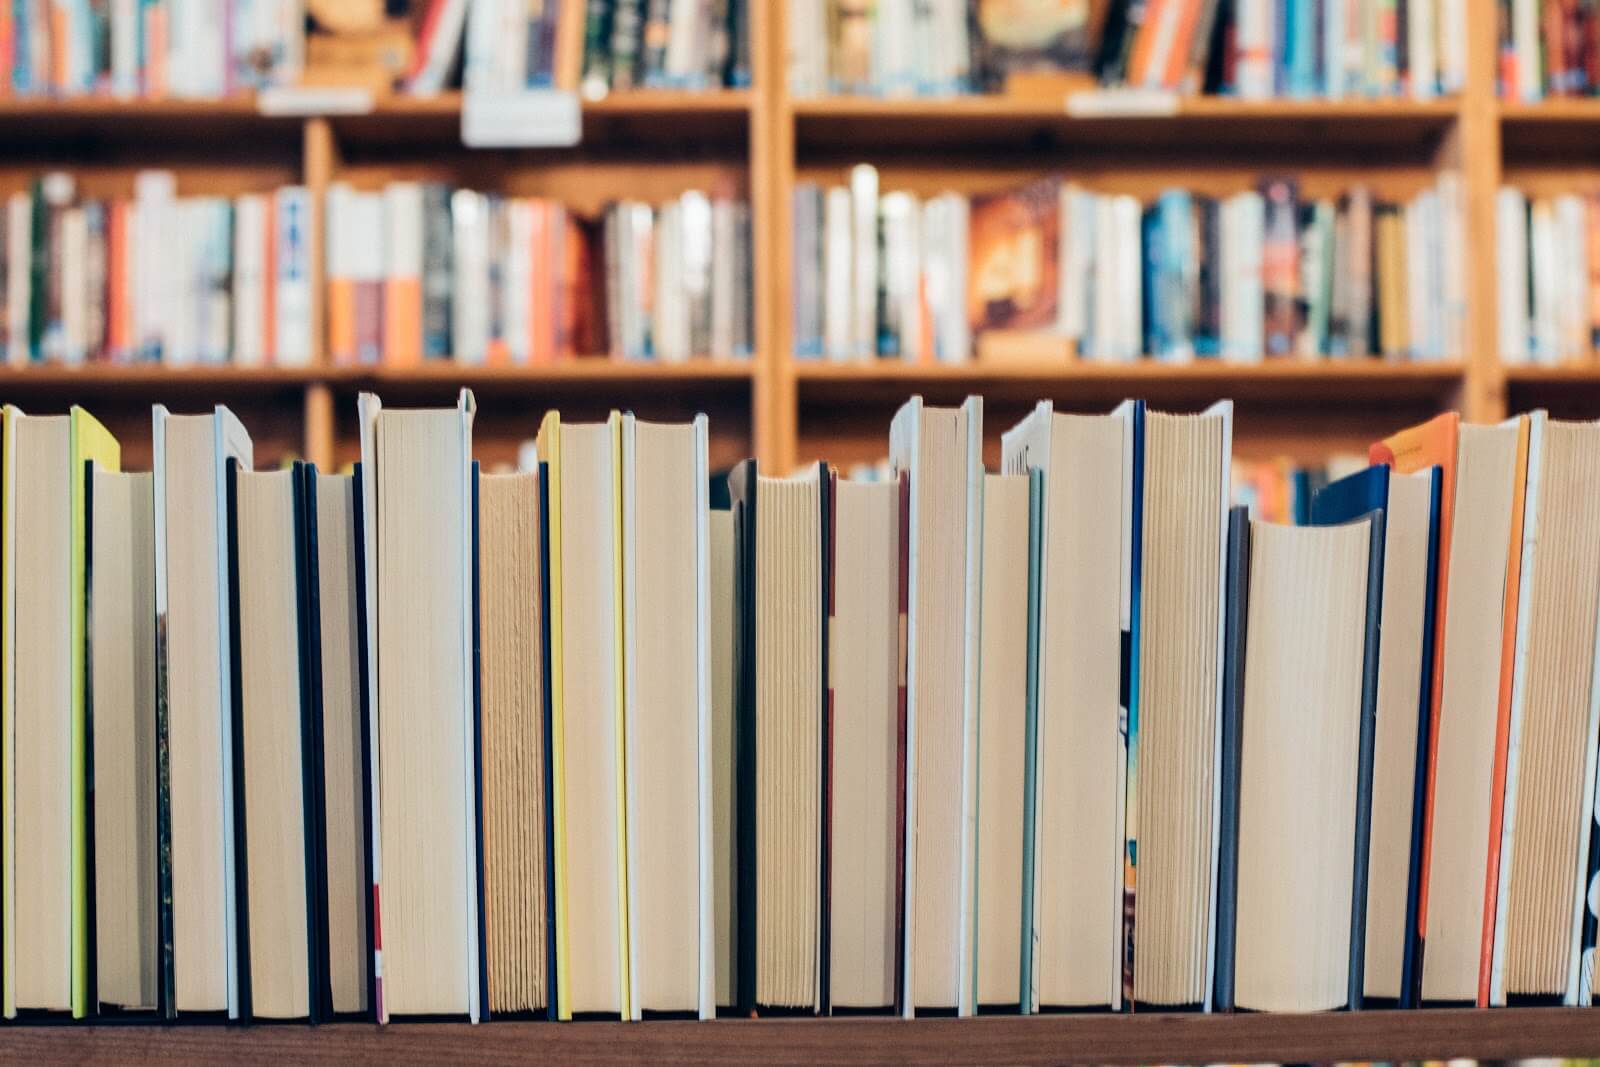 Books lined up on a library shelf